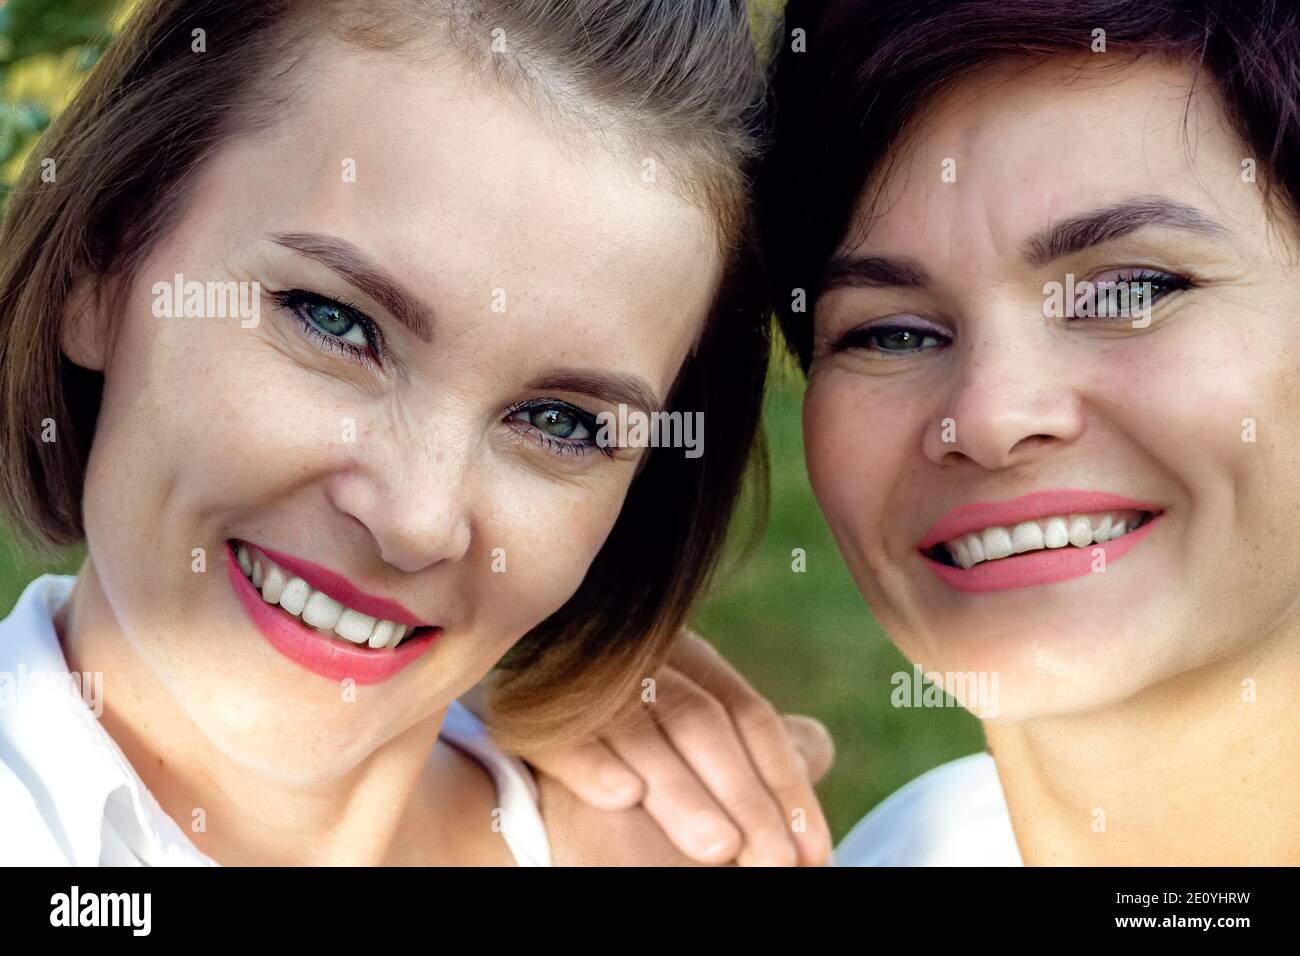 Friendship of women. Two beautiful women of Caucasian appearance are smiling. Close-up portrait. Stock Photo